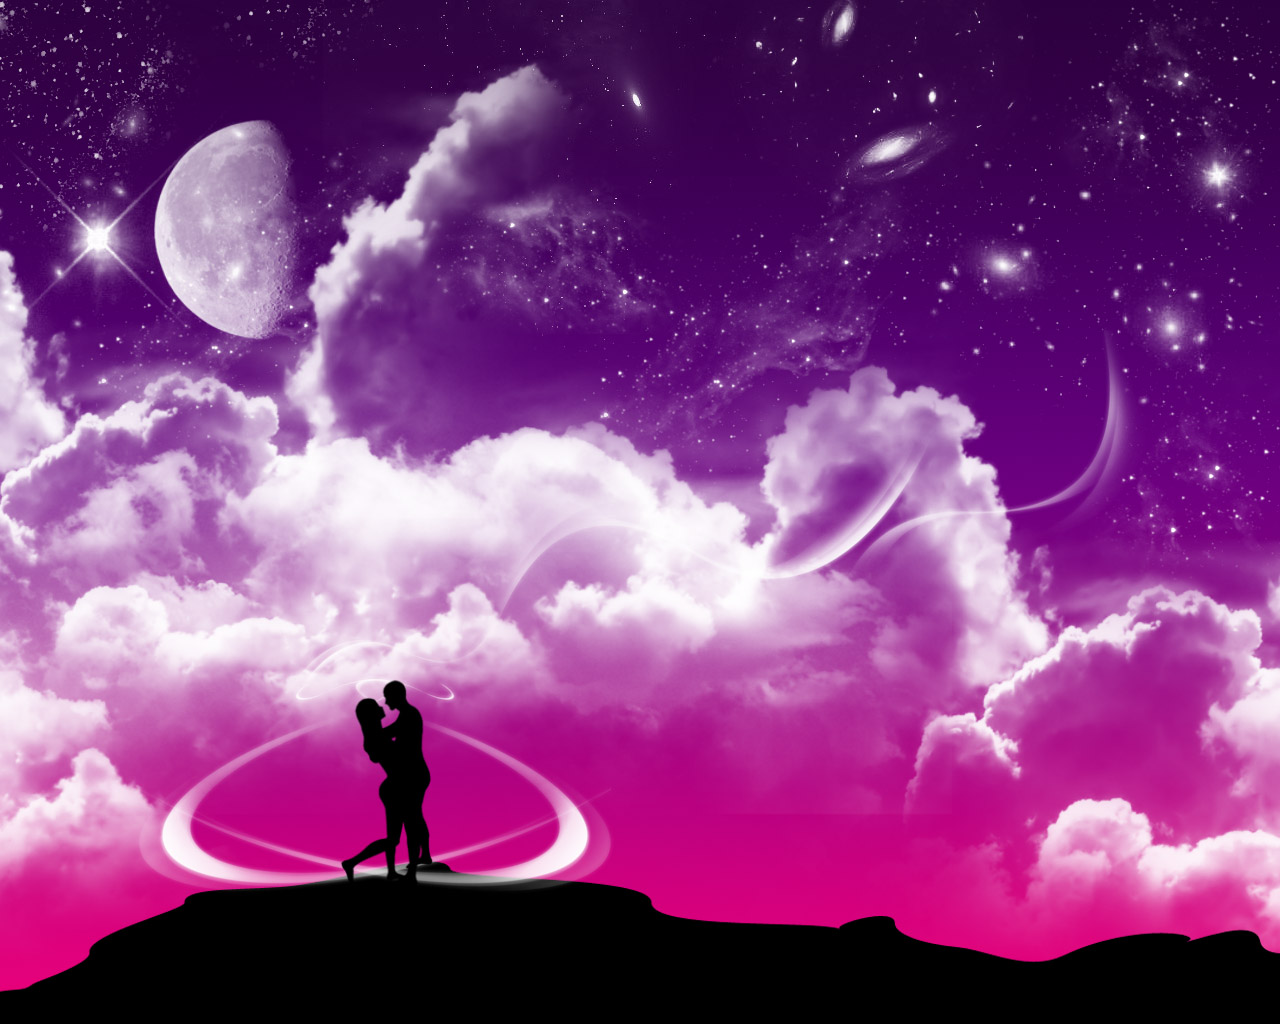 Couple Love - Romantic Love wallpapers for Valentine's Day